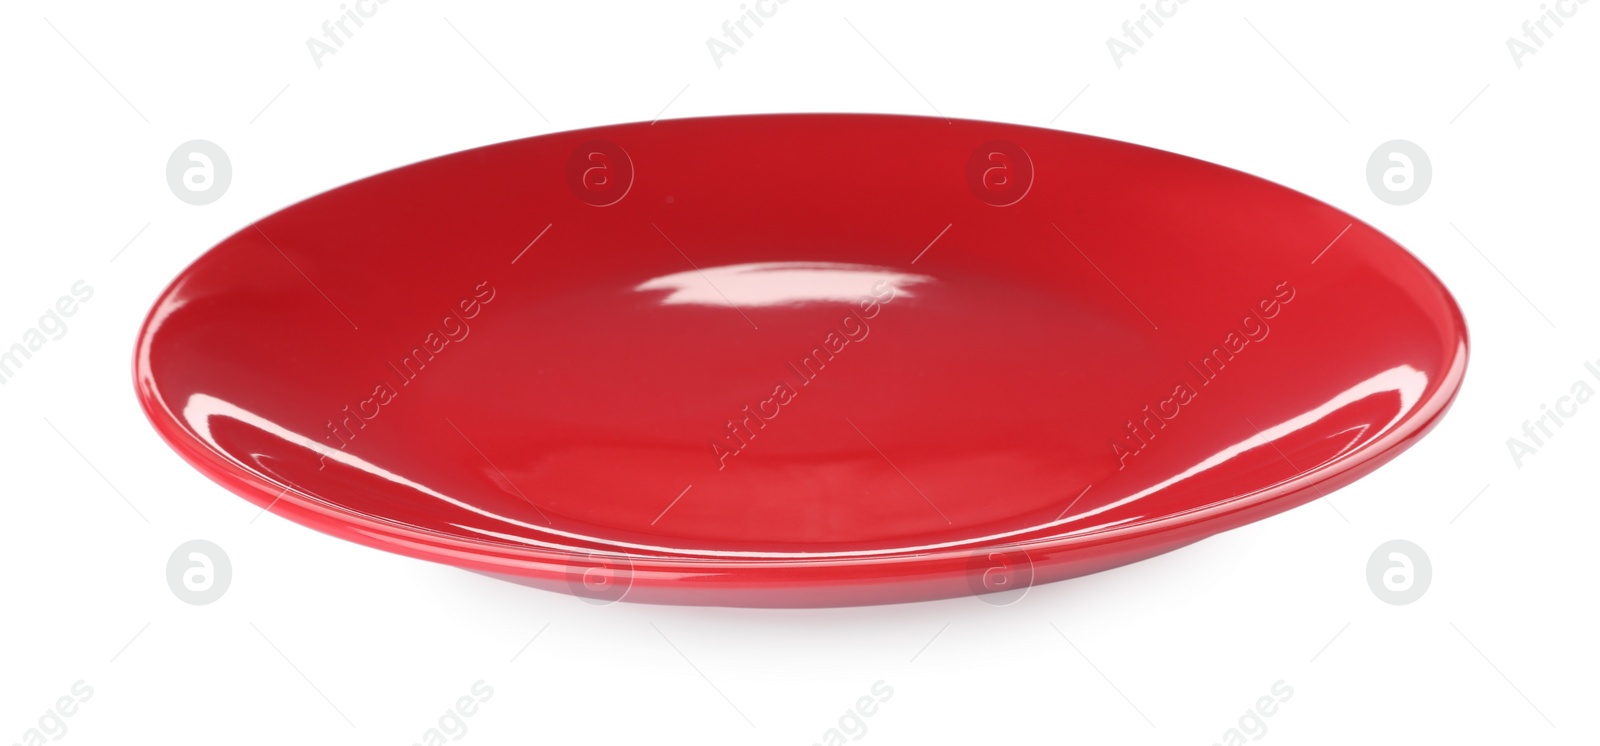 Photo of Empty clean ceramic plate isolated on white